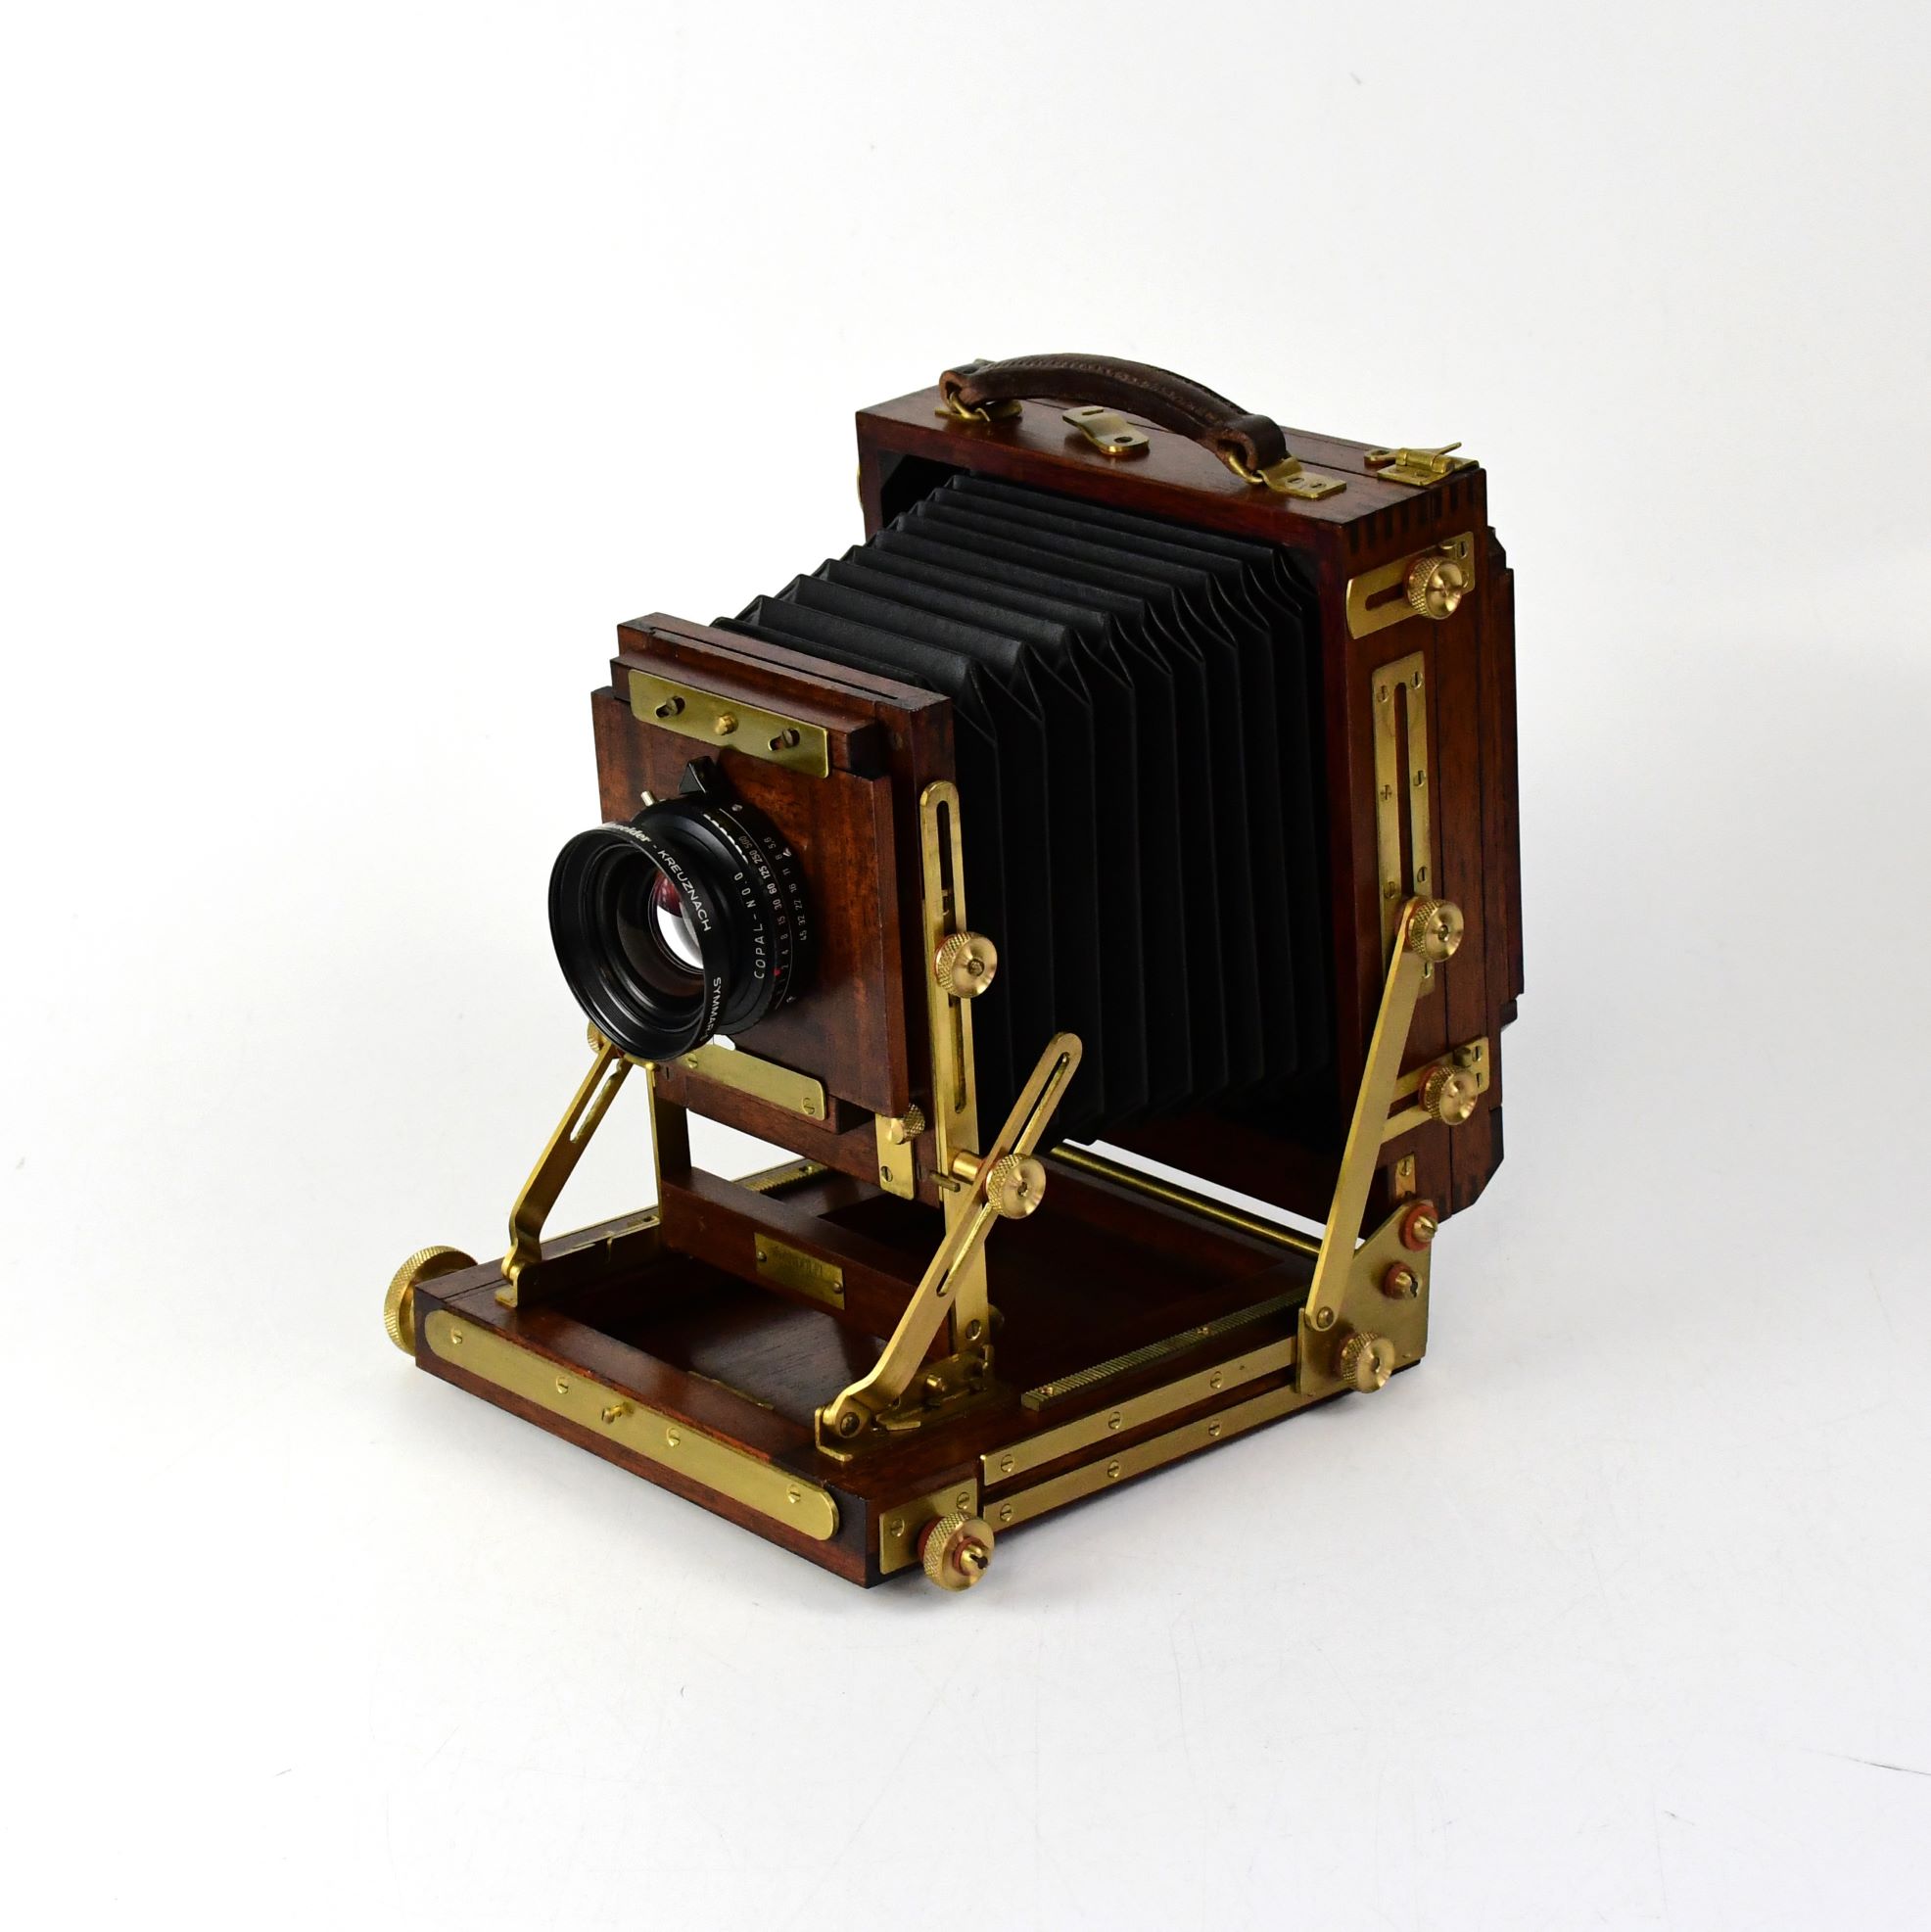 Photographic, Optical & Scientific Equipment and Coins with Antiques & Collectors’ Items (Liverpool)